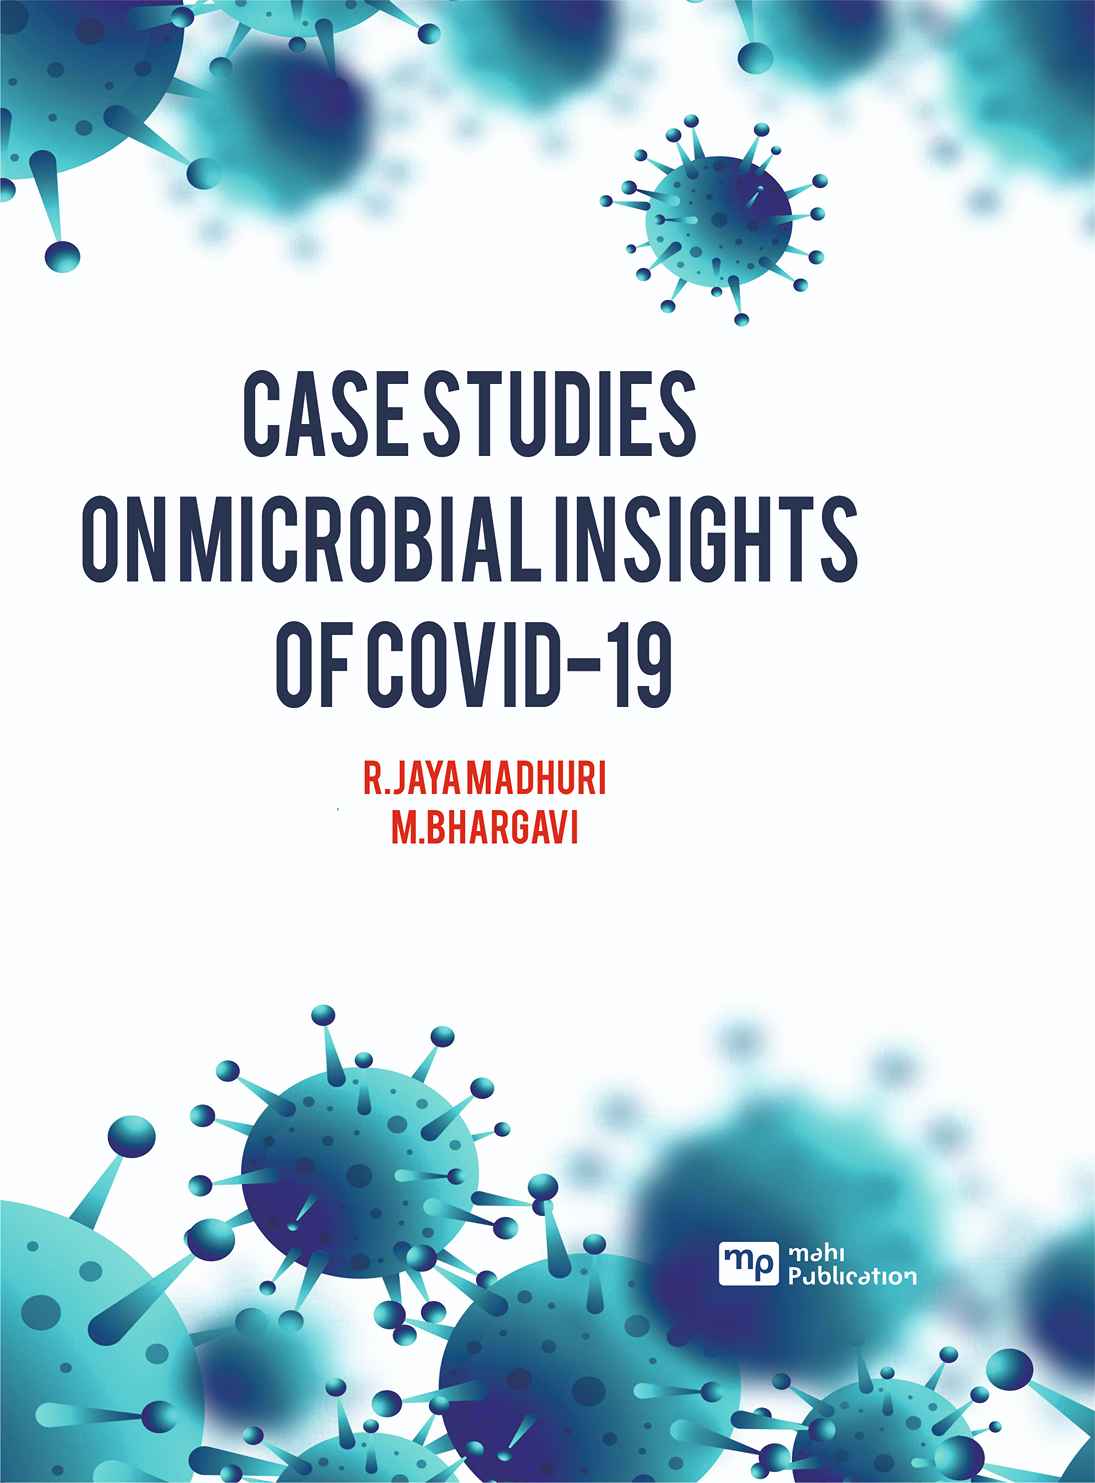 Case Studies On Microbial Insights Of Covid-19